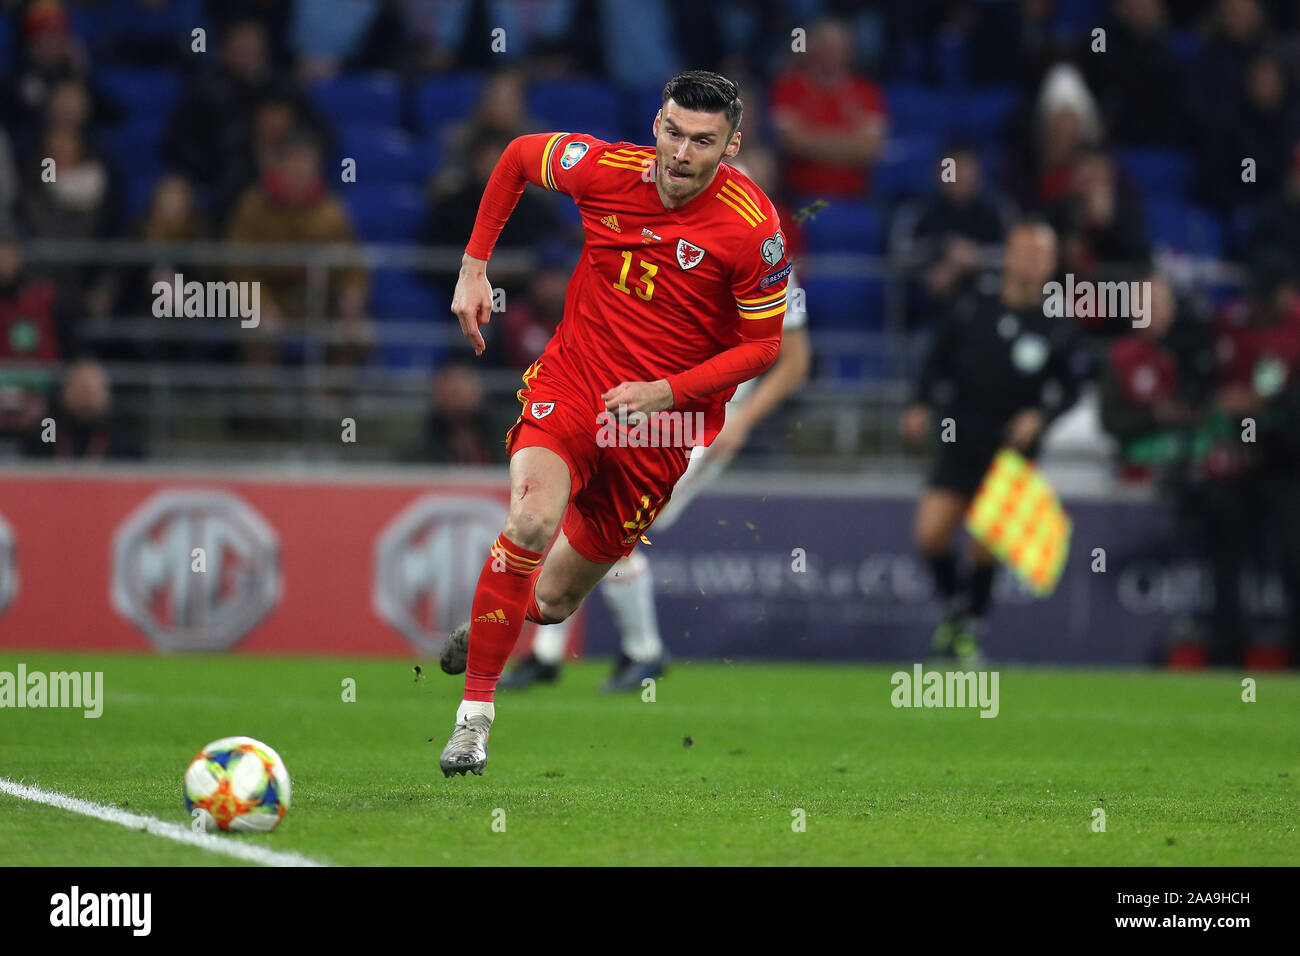 Kieffer Moore of Wales in action. UEFA Euro 2020 qualifier group E match, Wales v Hungary at the Cardiff city Stadium in Cardiff , South Wales on Tuesday 19th November 2019. pic by Andrew Orchard/Andrew Orchard sports photography/Alamy live News EDITORIAL USE ONLY Stock Photo